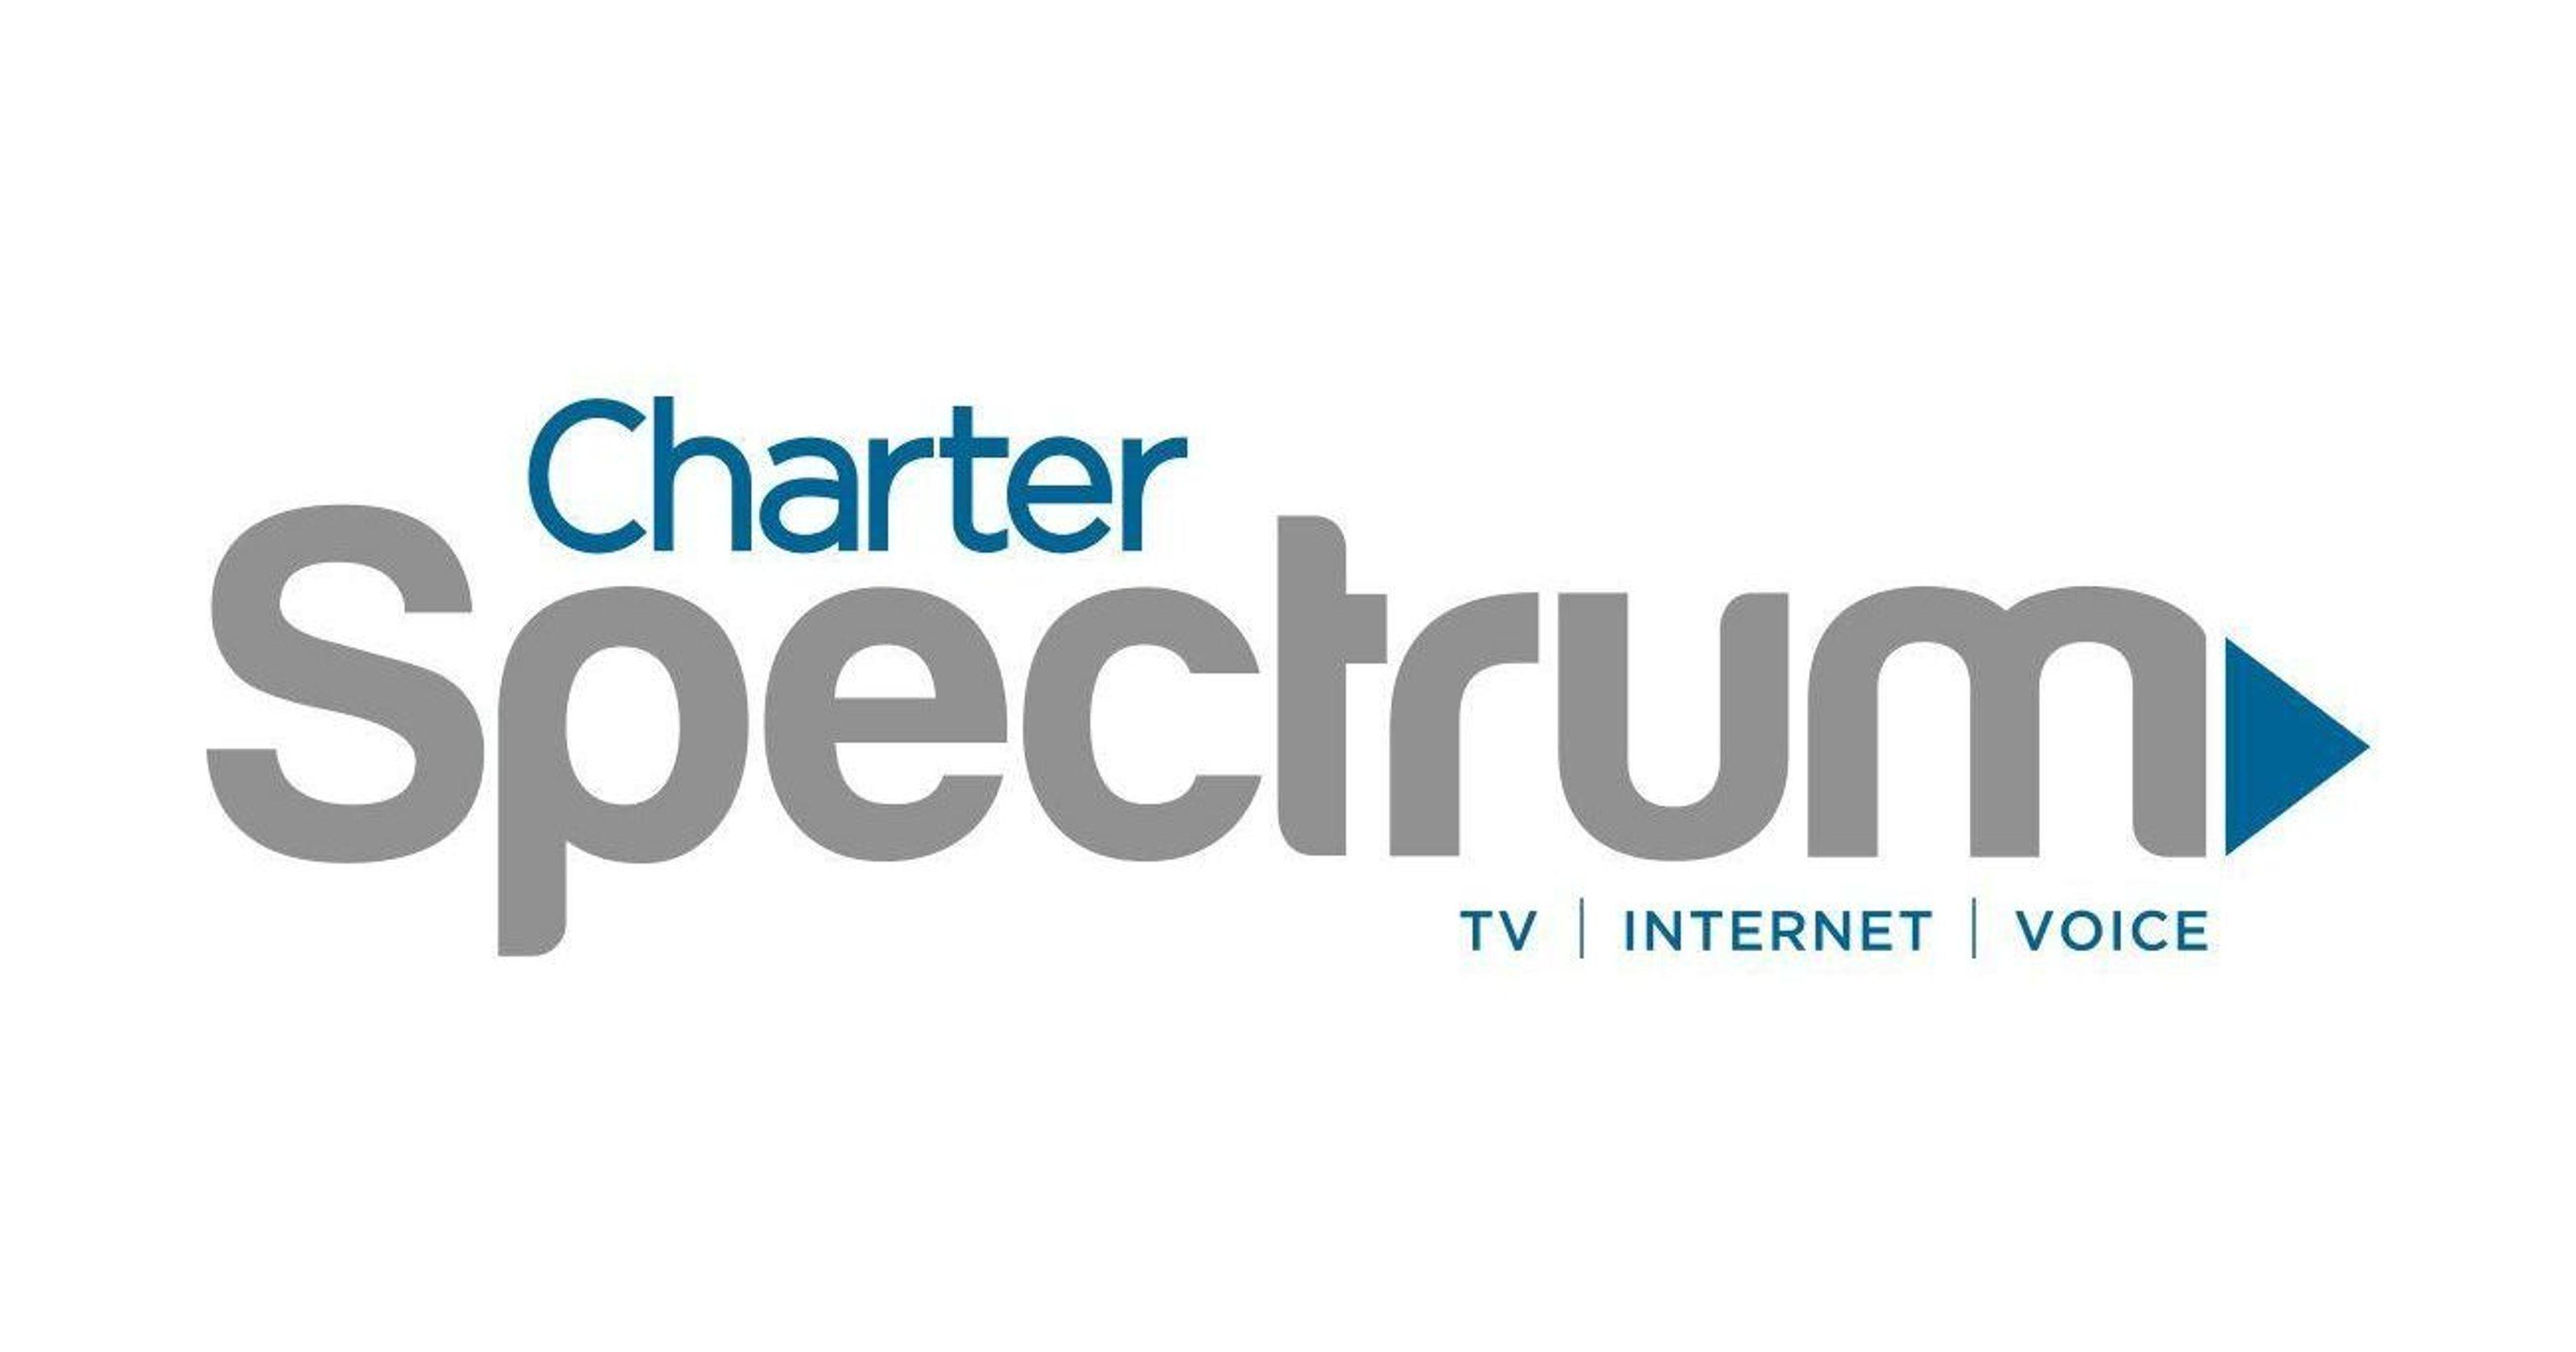 Charter Communications Logo - Why did New York rush the Charter Spectrum vote?